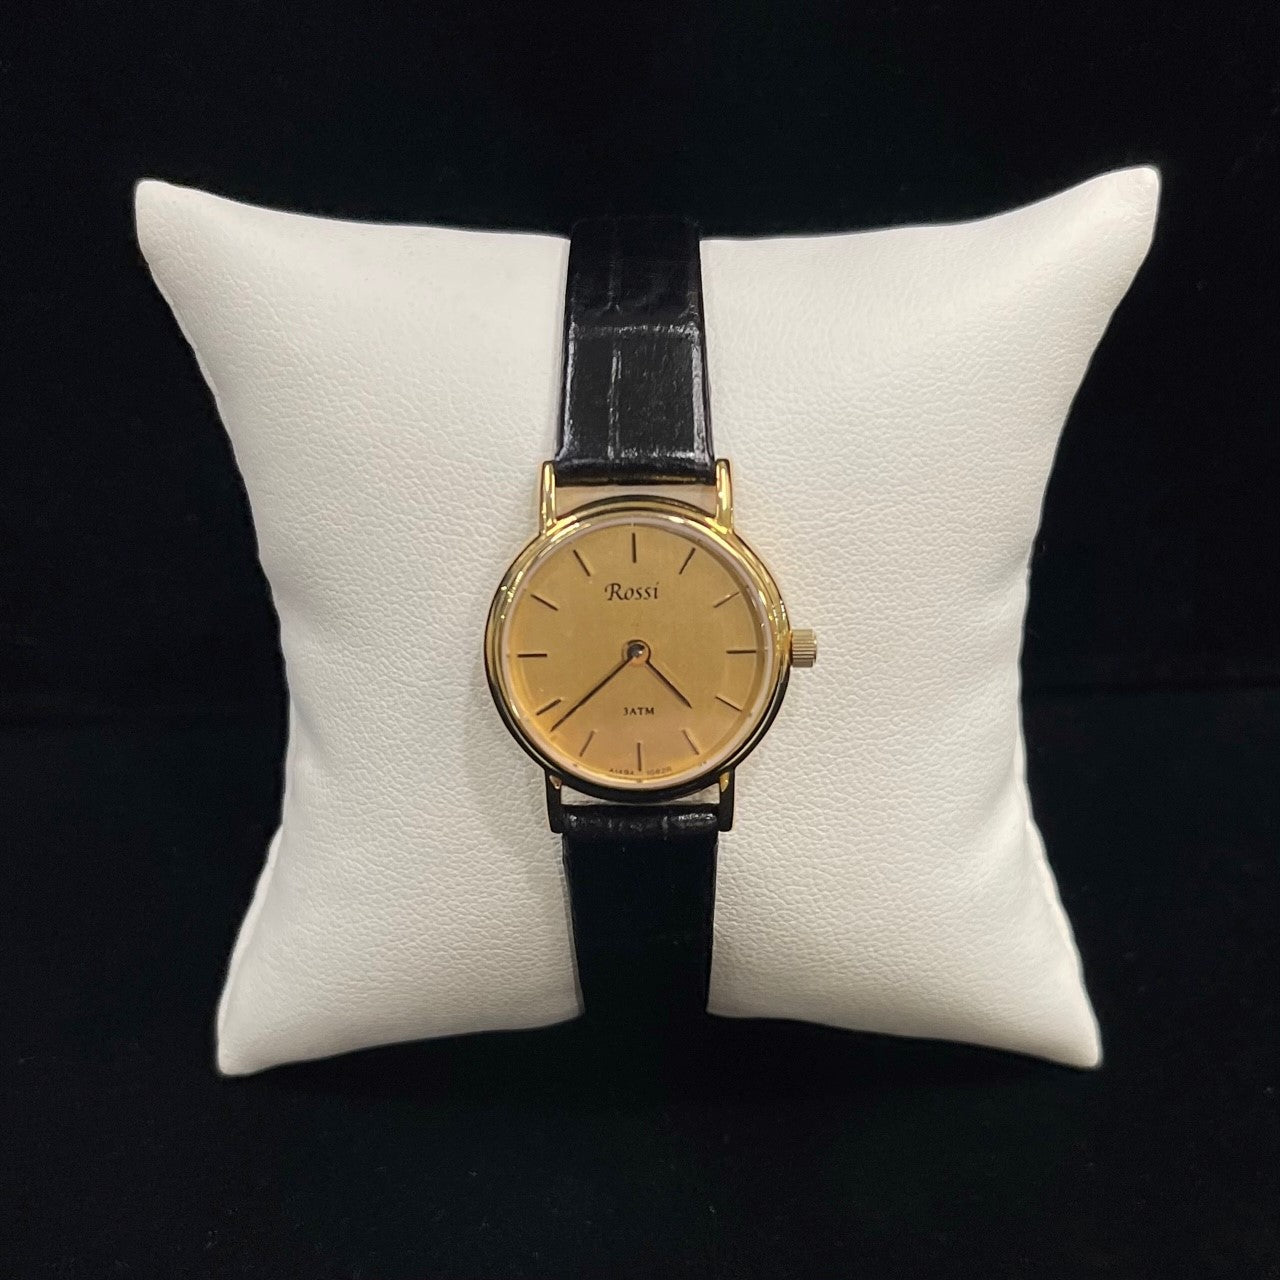 Rossi Ladies 14K Yellow Gold Watch with a Genuine Leather Strap